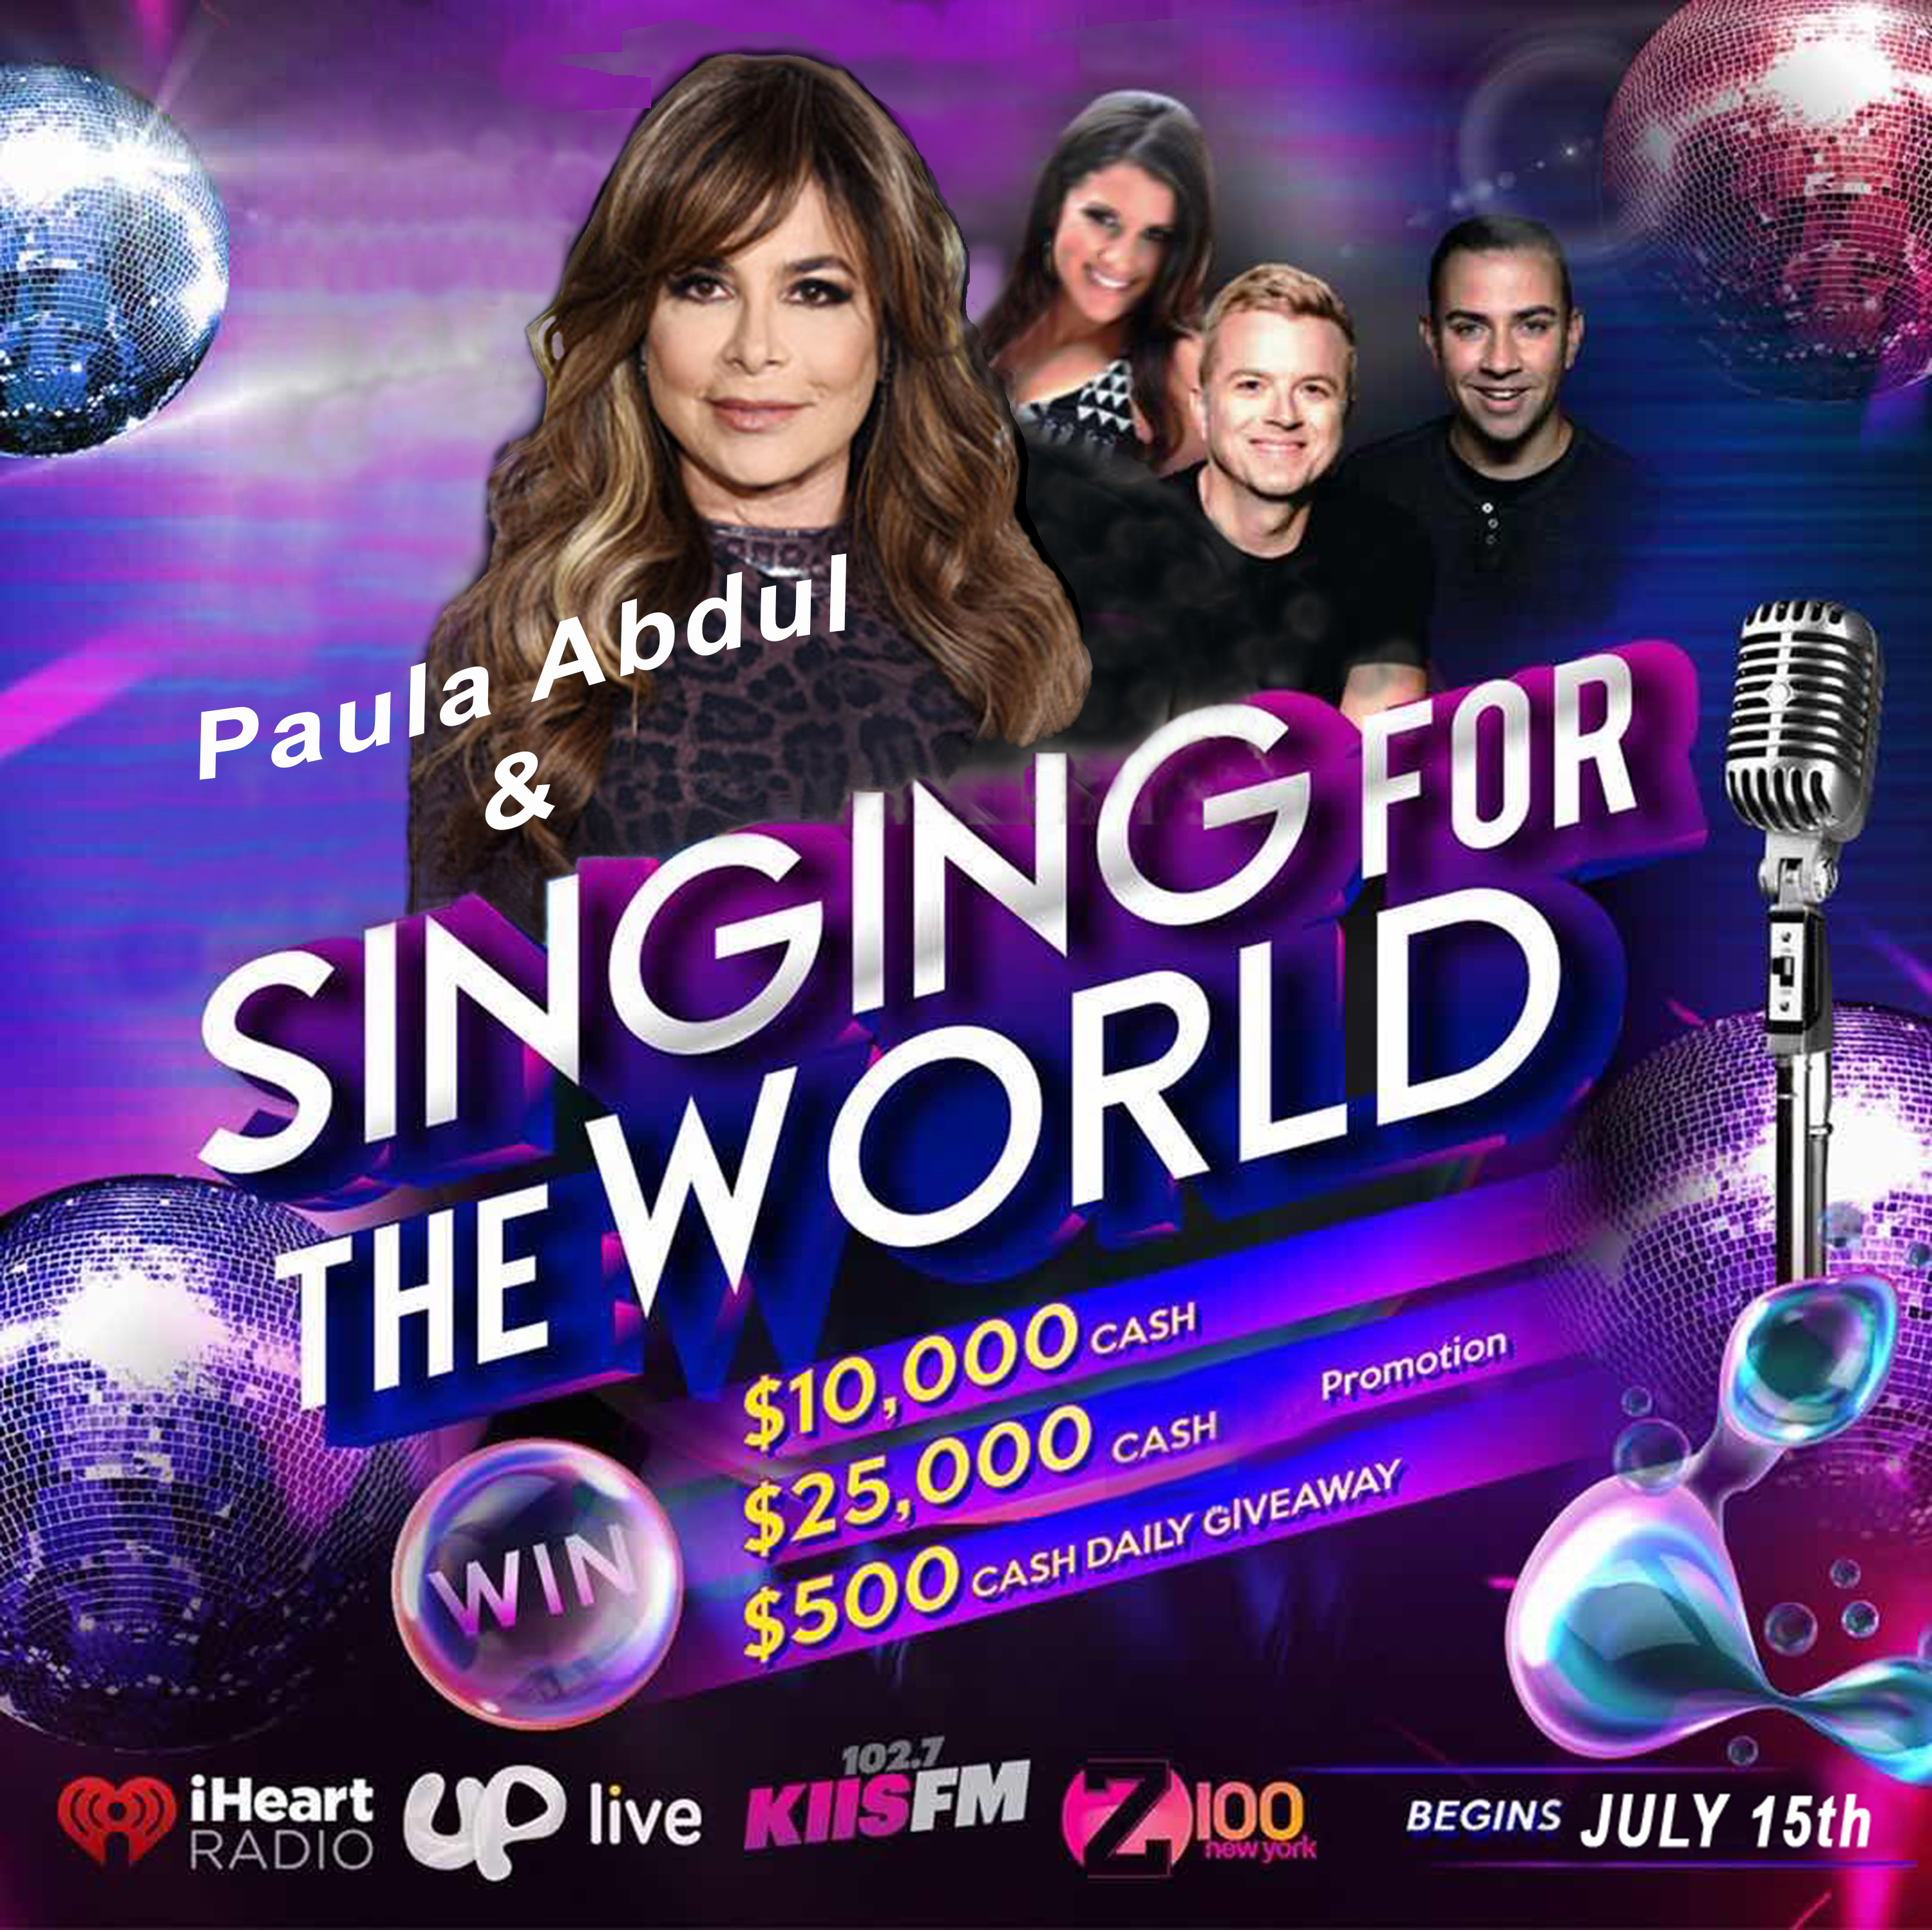 Paula Abdul Announces Winners of the UpLive USA Virtual Music Competition: “Singing For The World” #SFTW, a Partnered event with iHeartRadio